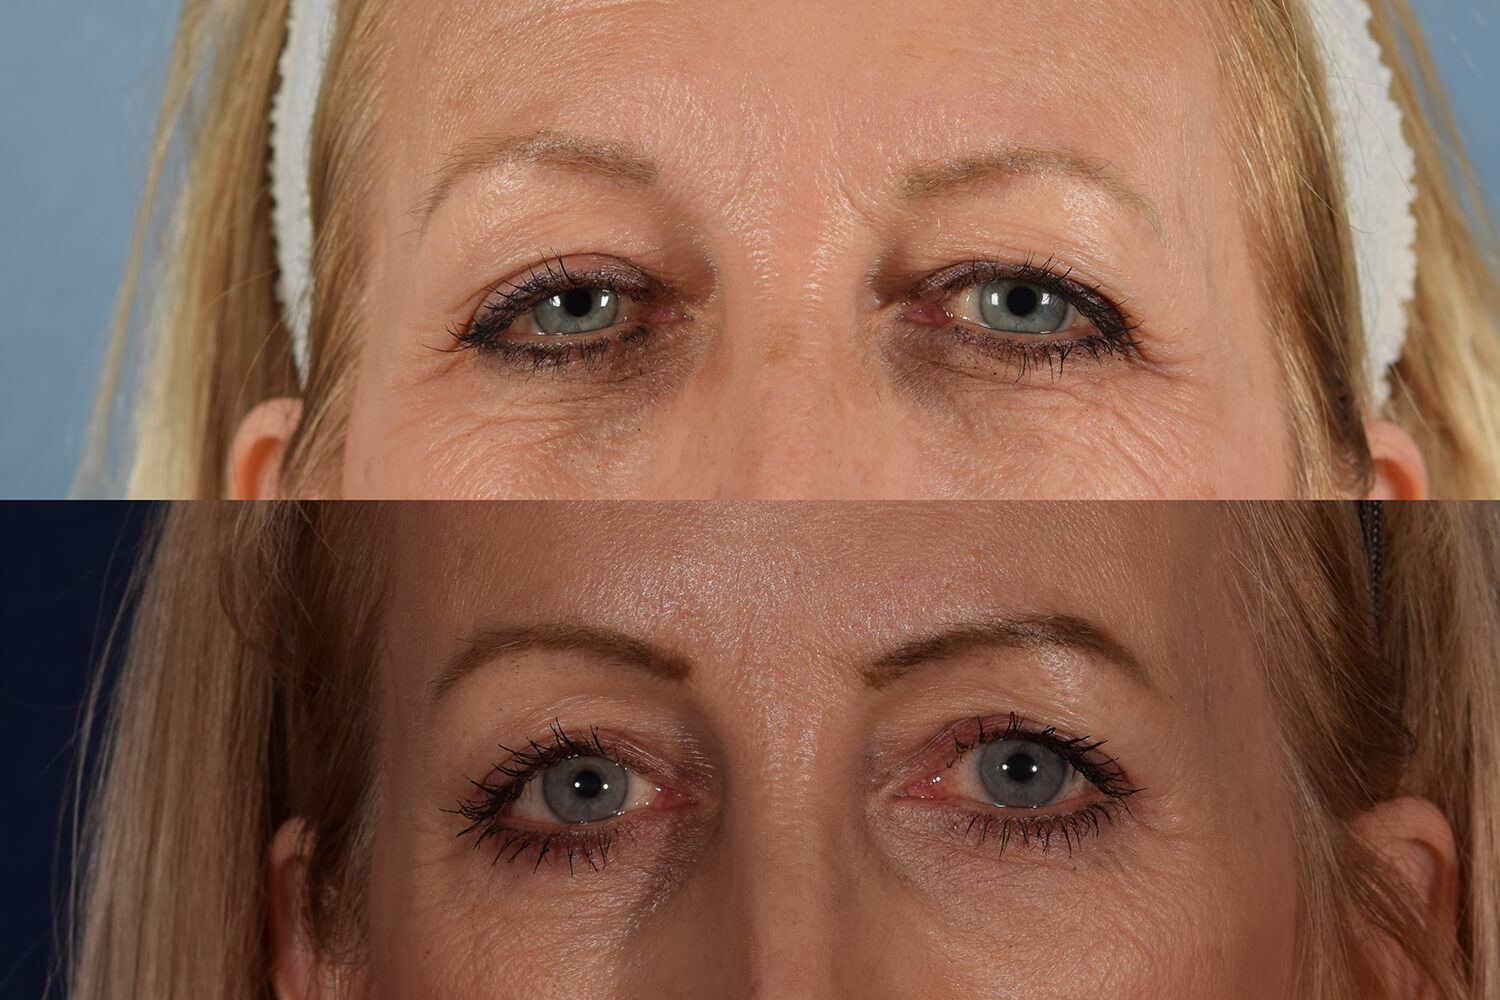 Gallery: Endoscopic Brow Lift and Upper Eyelid Surgery